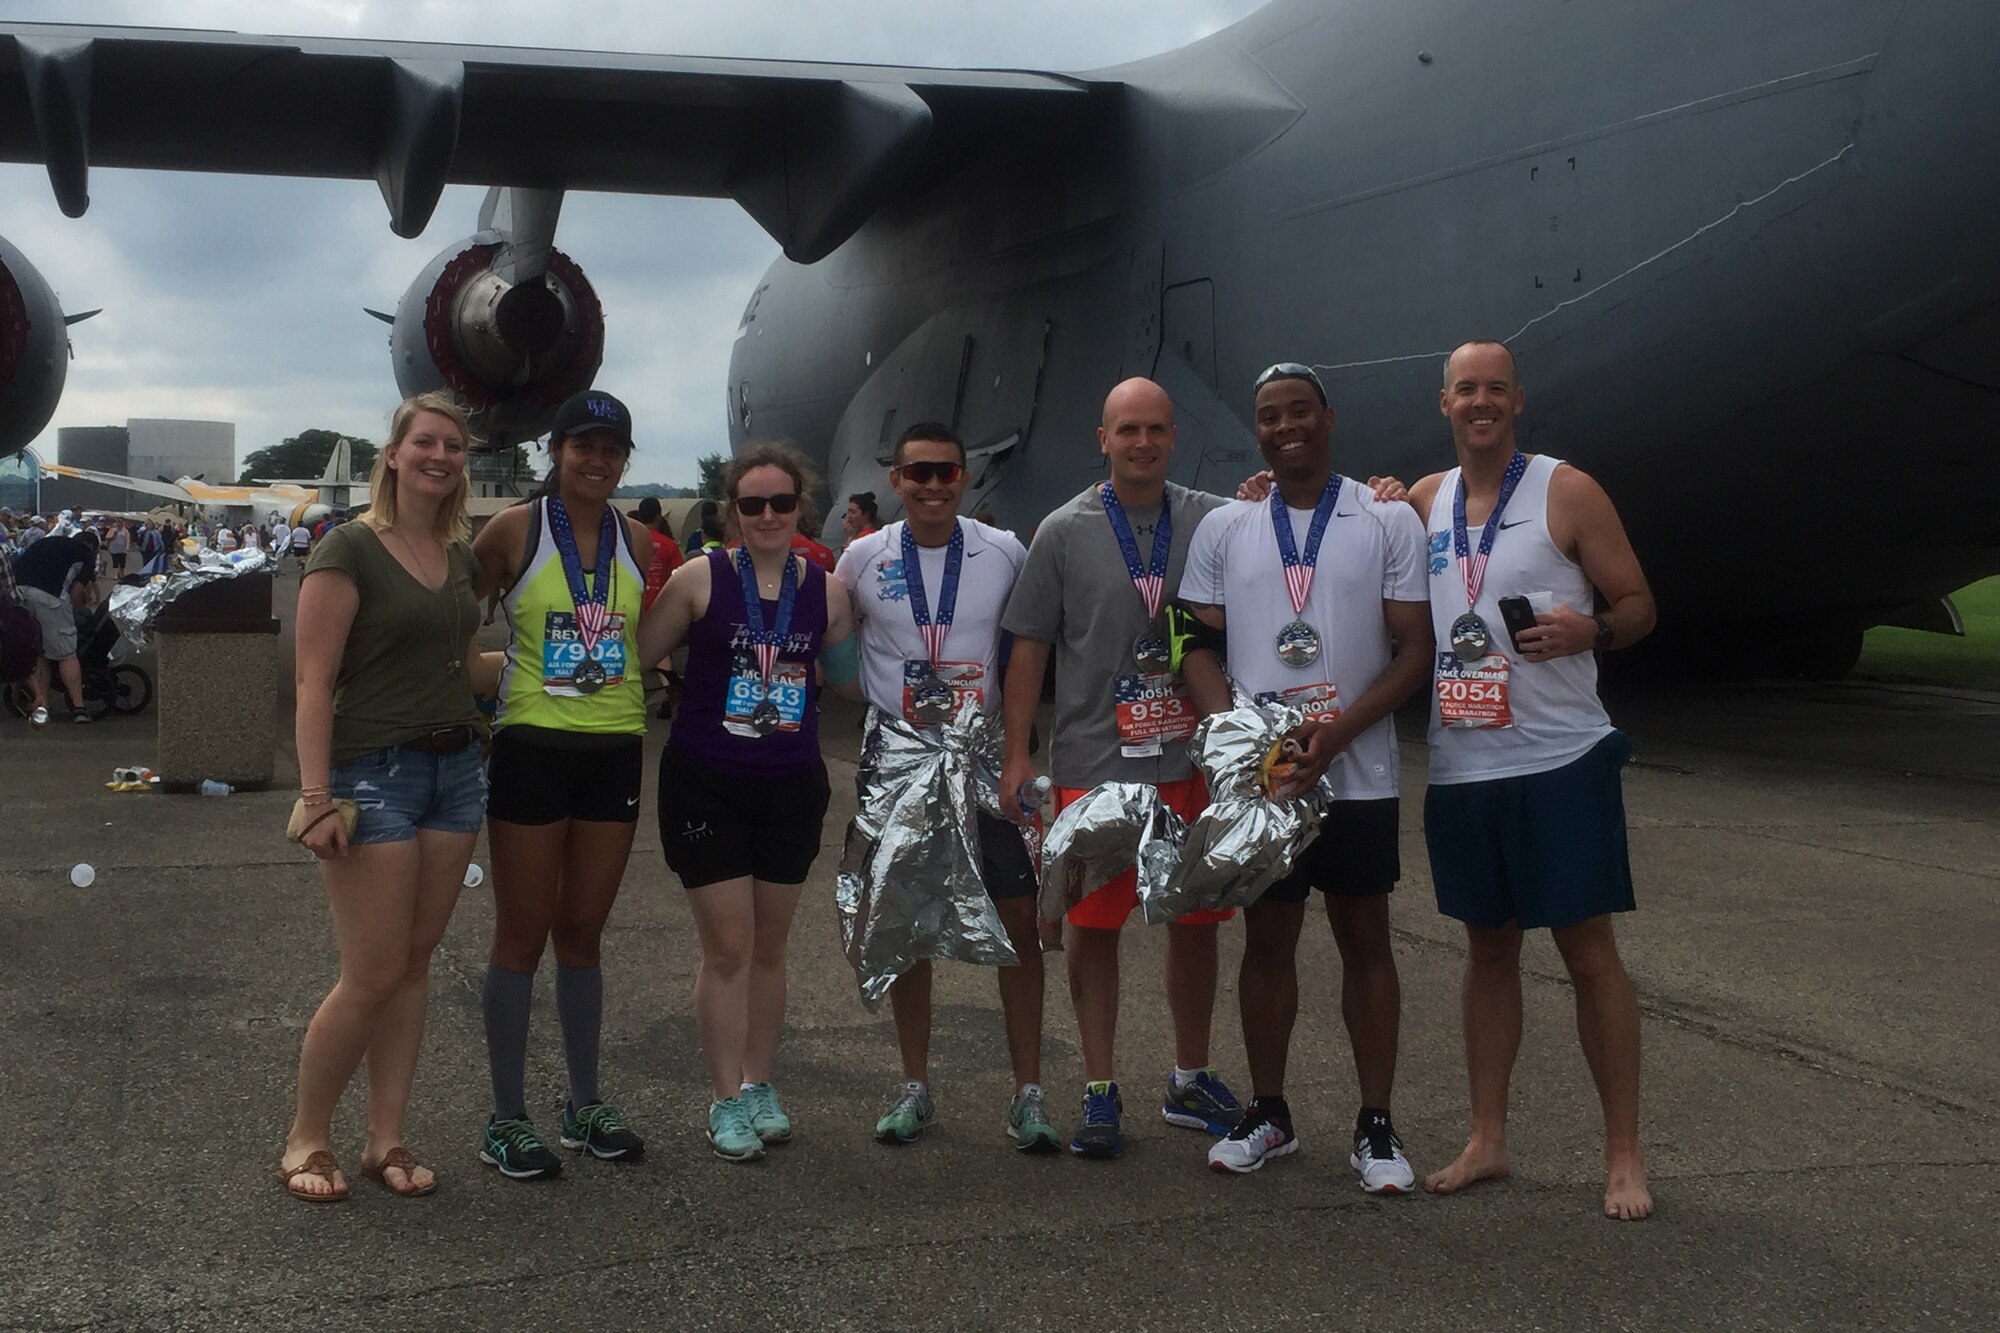 Members of Keesler's Dragon Run Club pose for a photo with other participants following completion of the 20th annual Air Force Marathon, SEpt. 17, 2016, on Wright-Patterson Air Force Base, Ohio. Eight members of Team Keesler participated in the 26.2 mile run. (Courtesy photo)